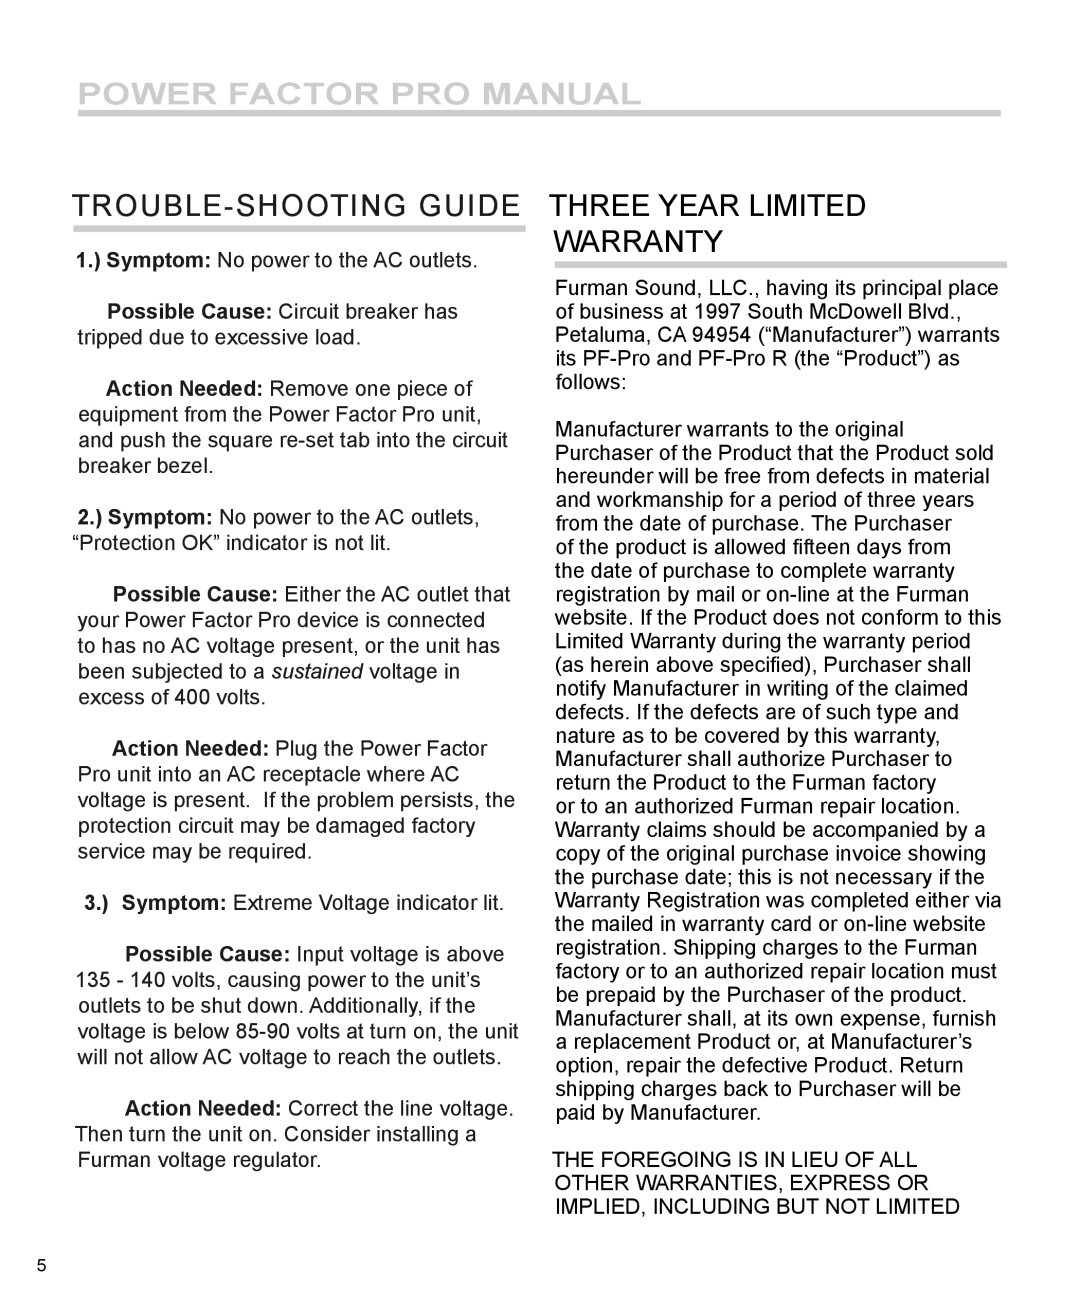 Furman Sound PF-Pro, PF-Pro R Trouble-Shooting Guide, Three Year Limited Warranty, Power Factor pro manual 